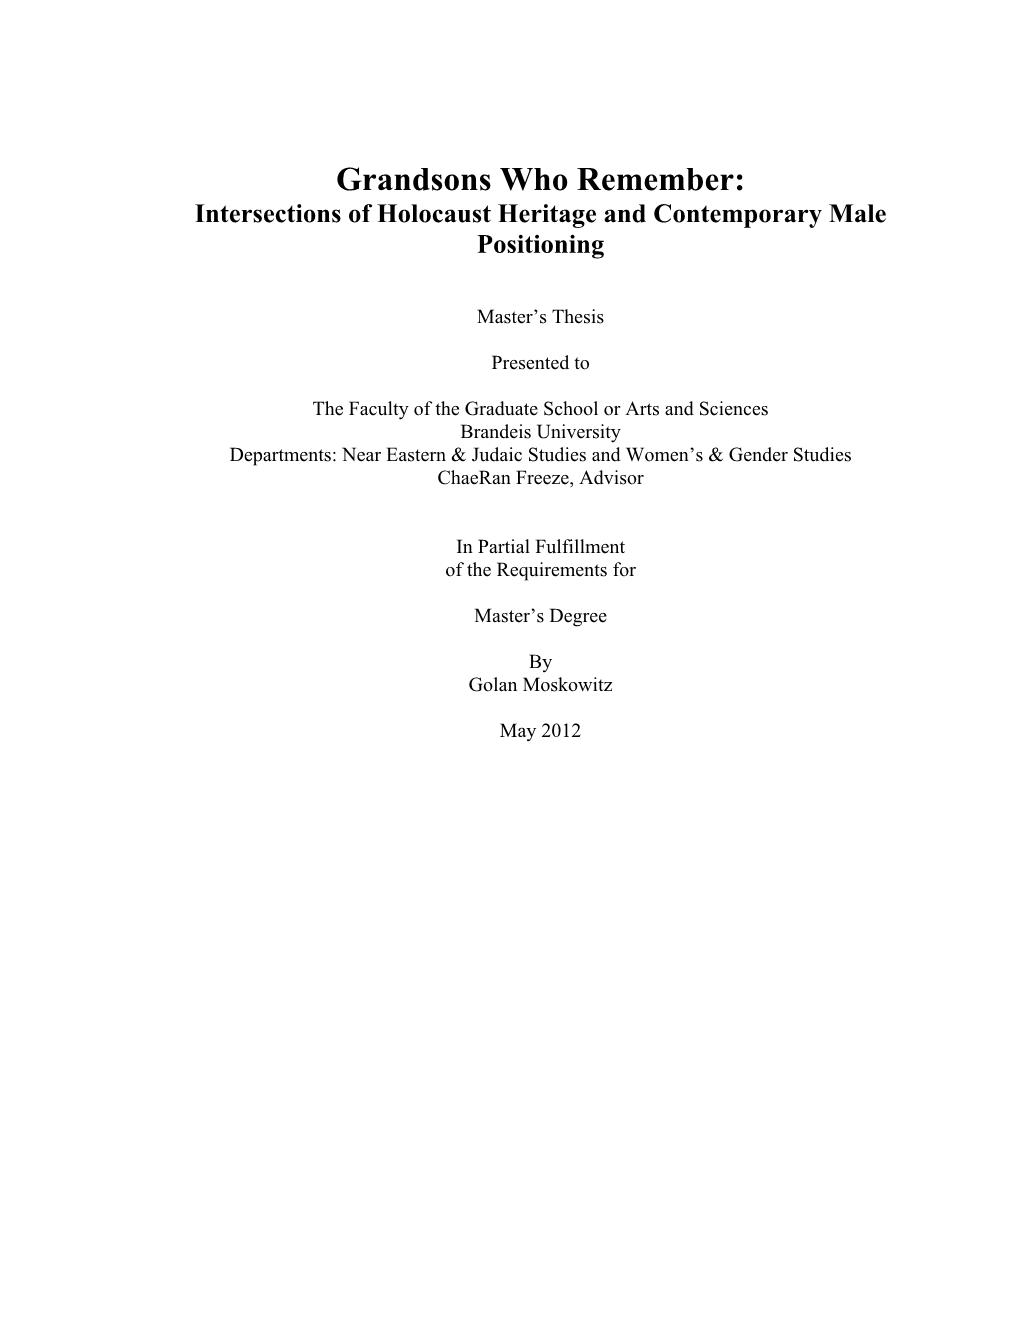 Grandsons Who Remember: Intersections of Holocaust Heritage and Contemporary Male Positioning